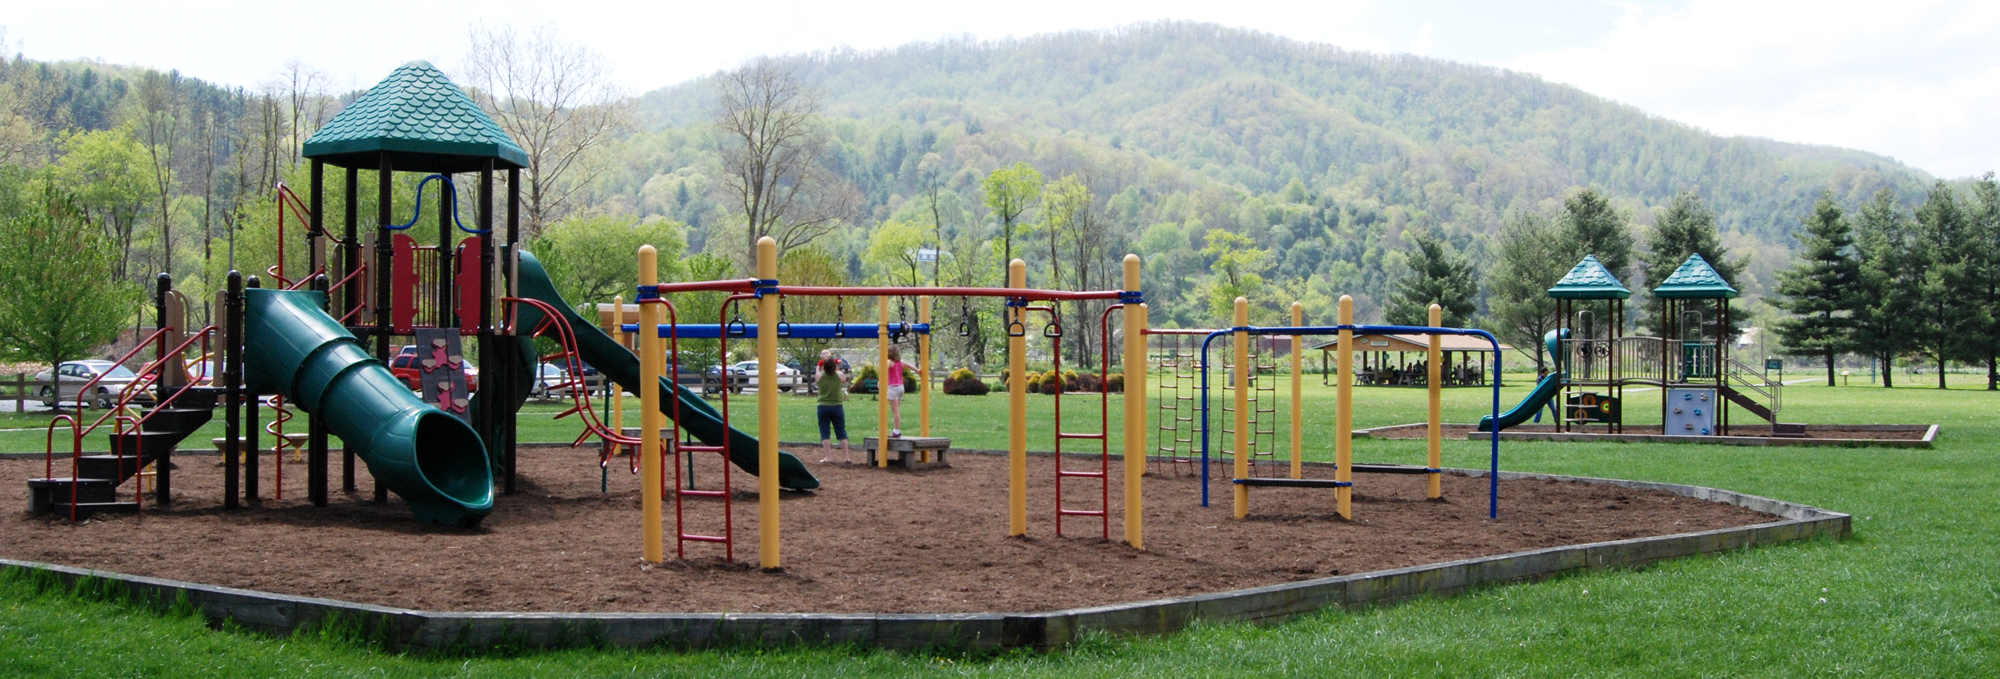 Playground Backgrounds, Compatible - PC, Mobile, Gadgets| 2000x679 px